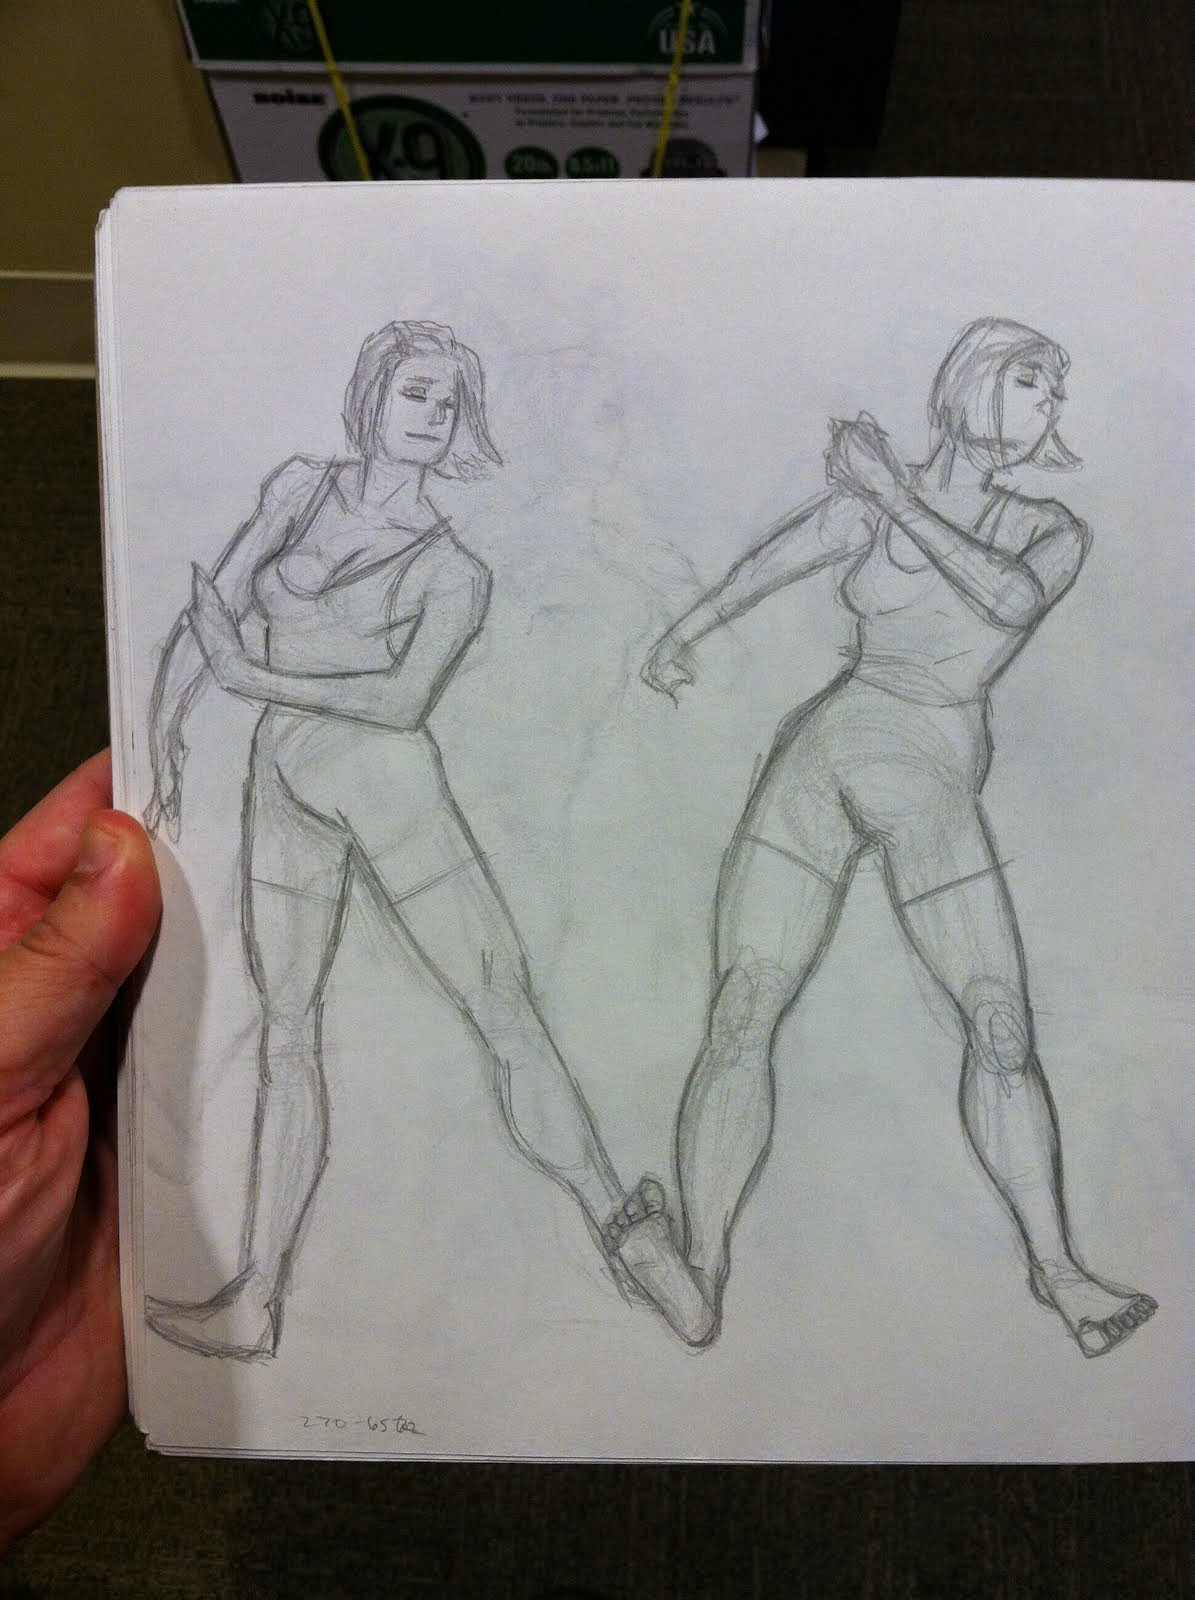 Dance sketching continued